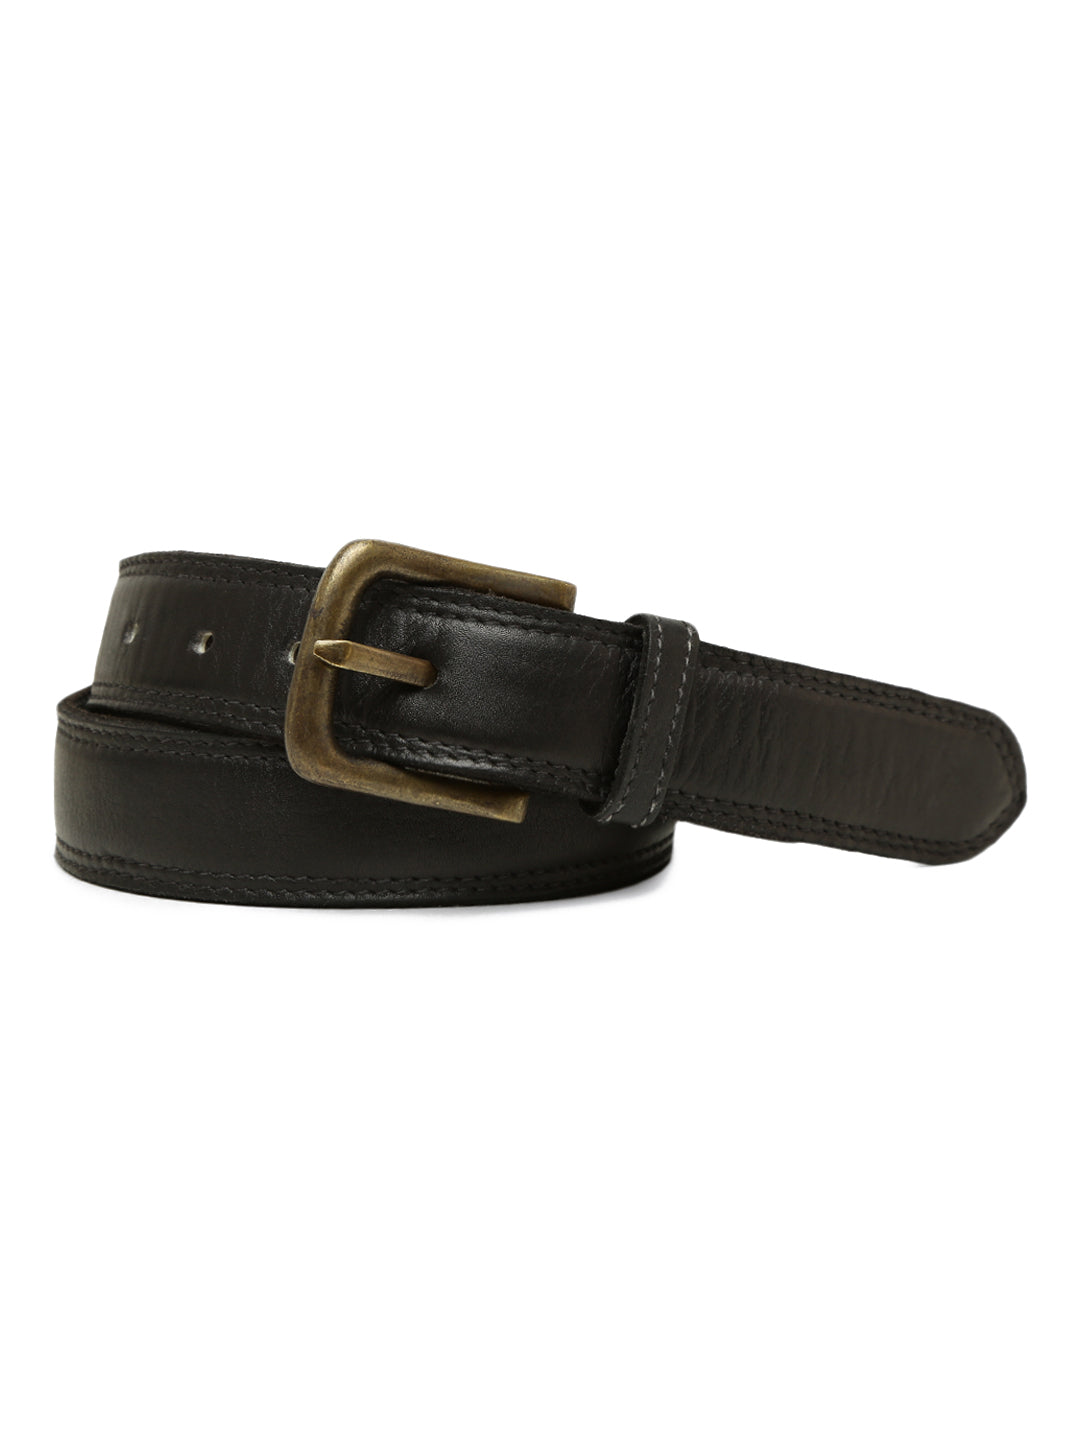 Plain With Side Stitching Black Mens Leather Belt